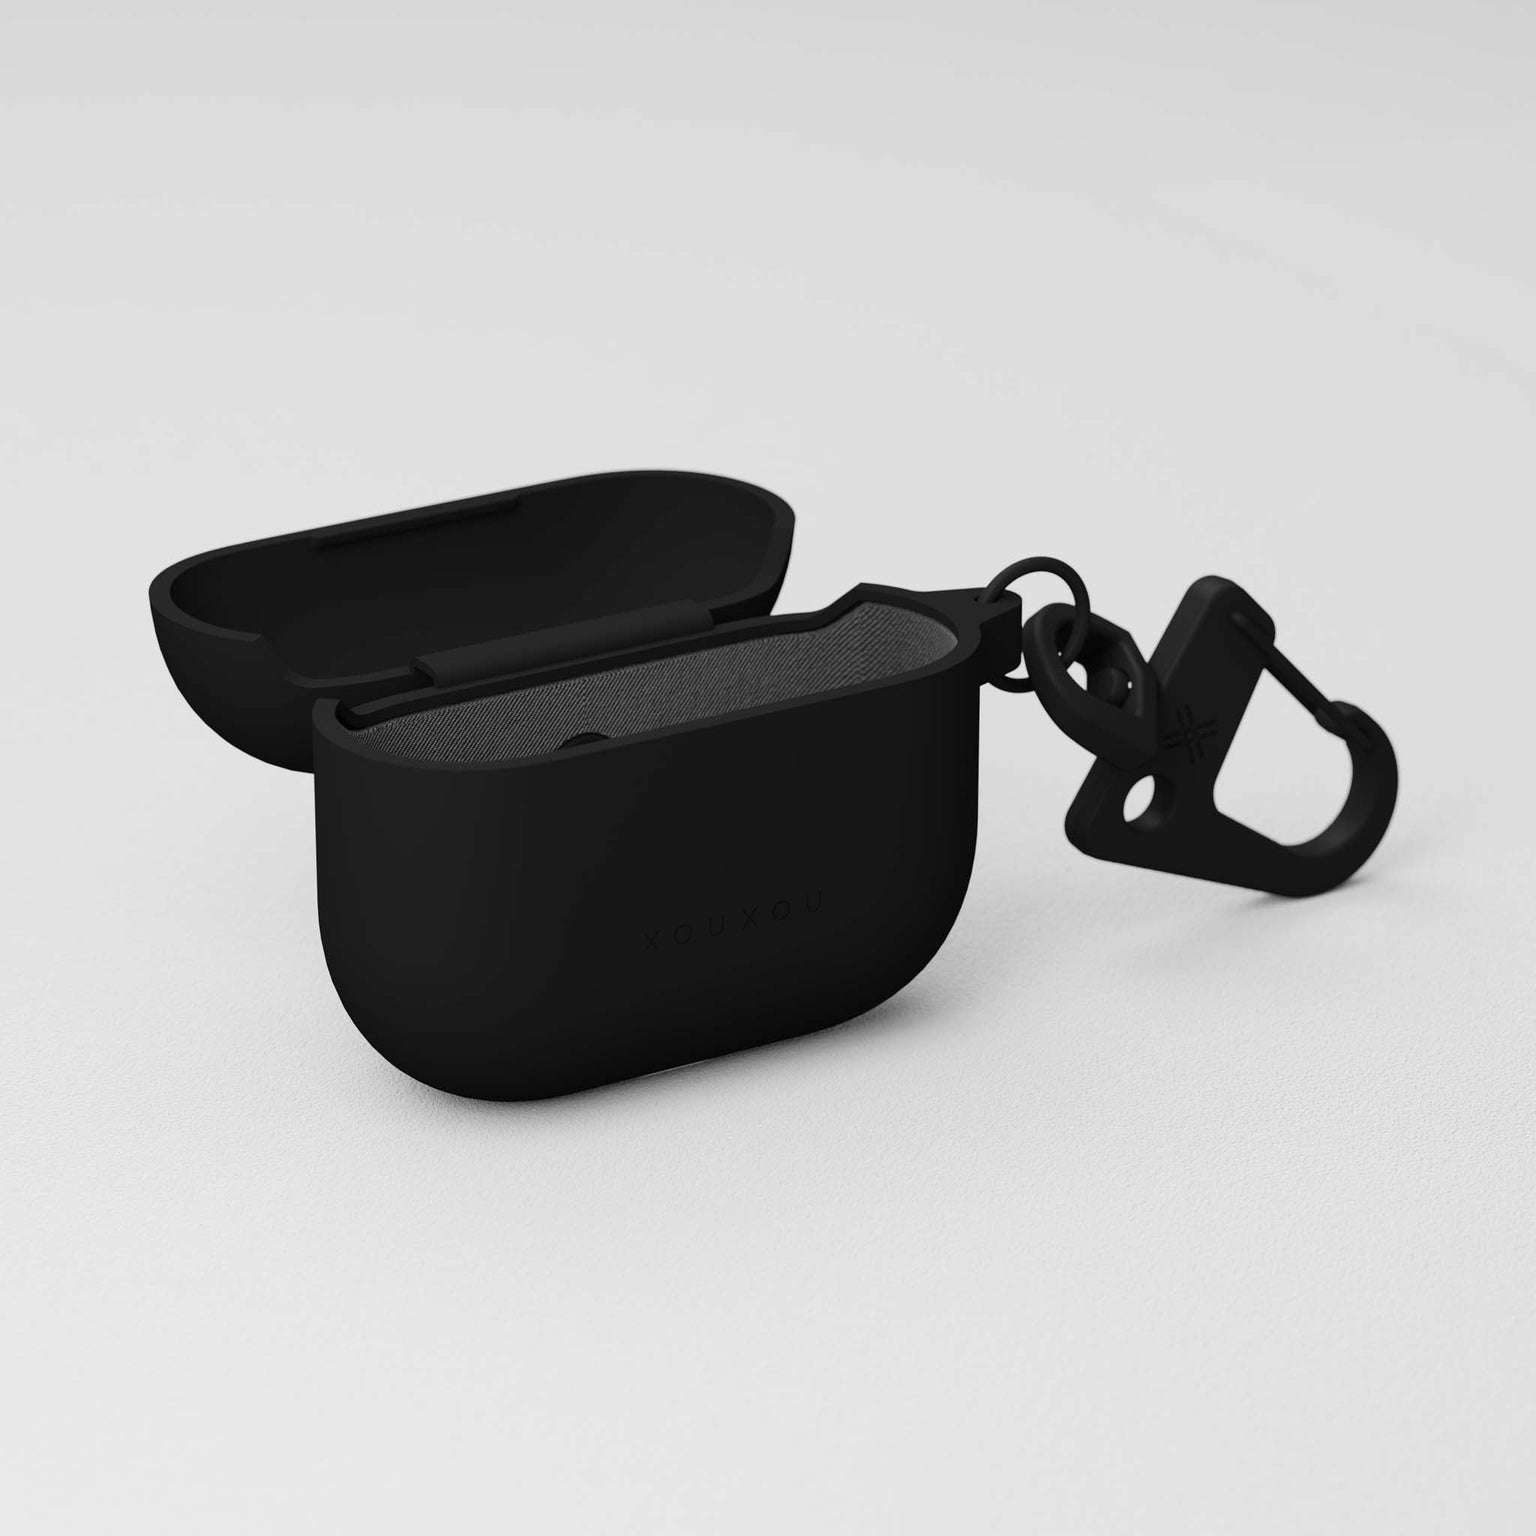 Apple AirPods case third generation in Black silicone with black carabiner hook | XOUXOU